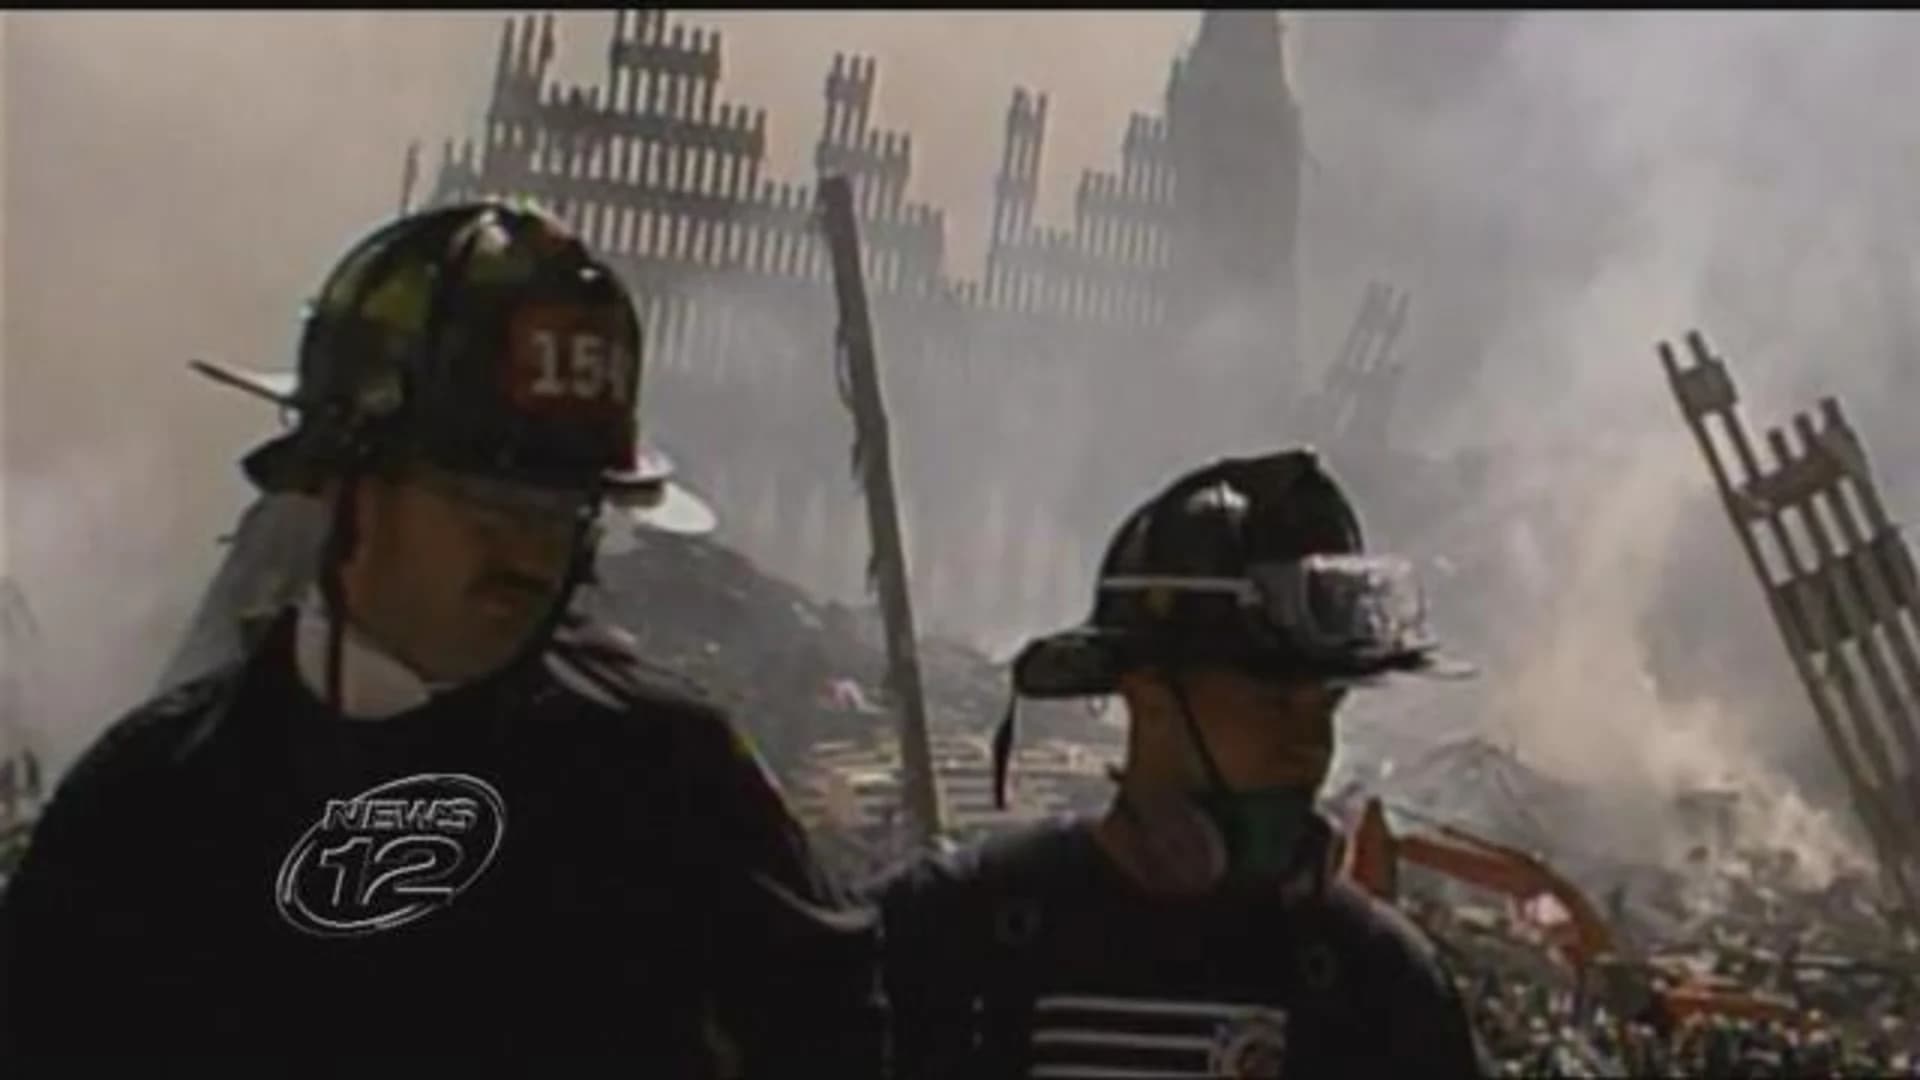 9/11 victims fund bill moves forward to full House and Senate